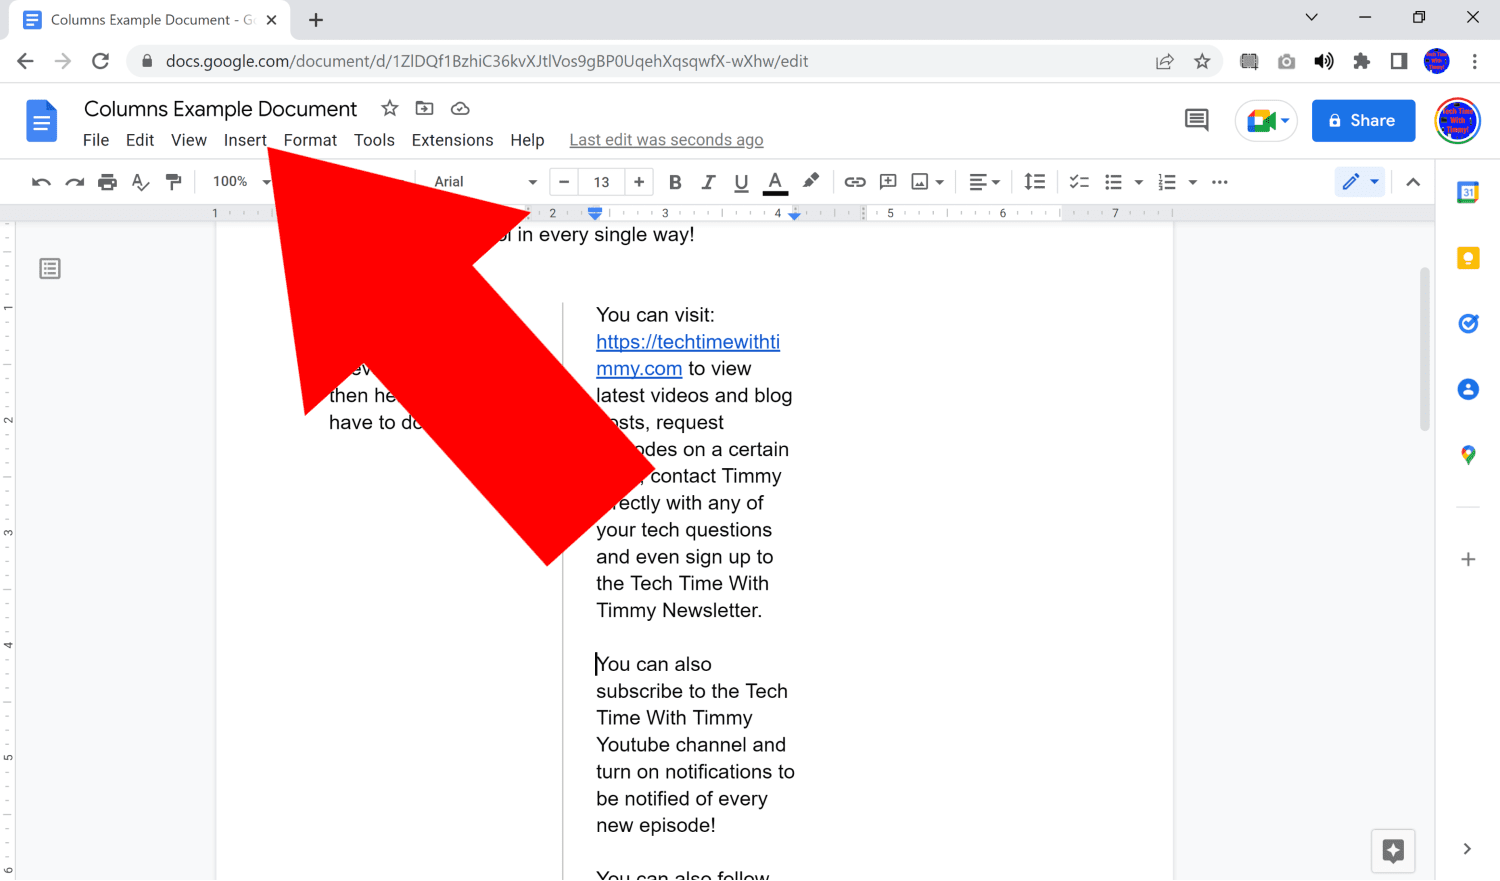 how to make rows and columns in google docs